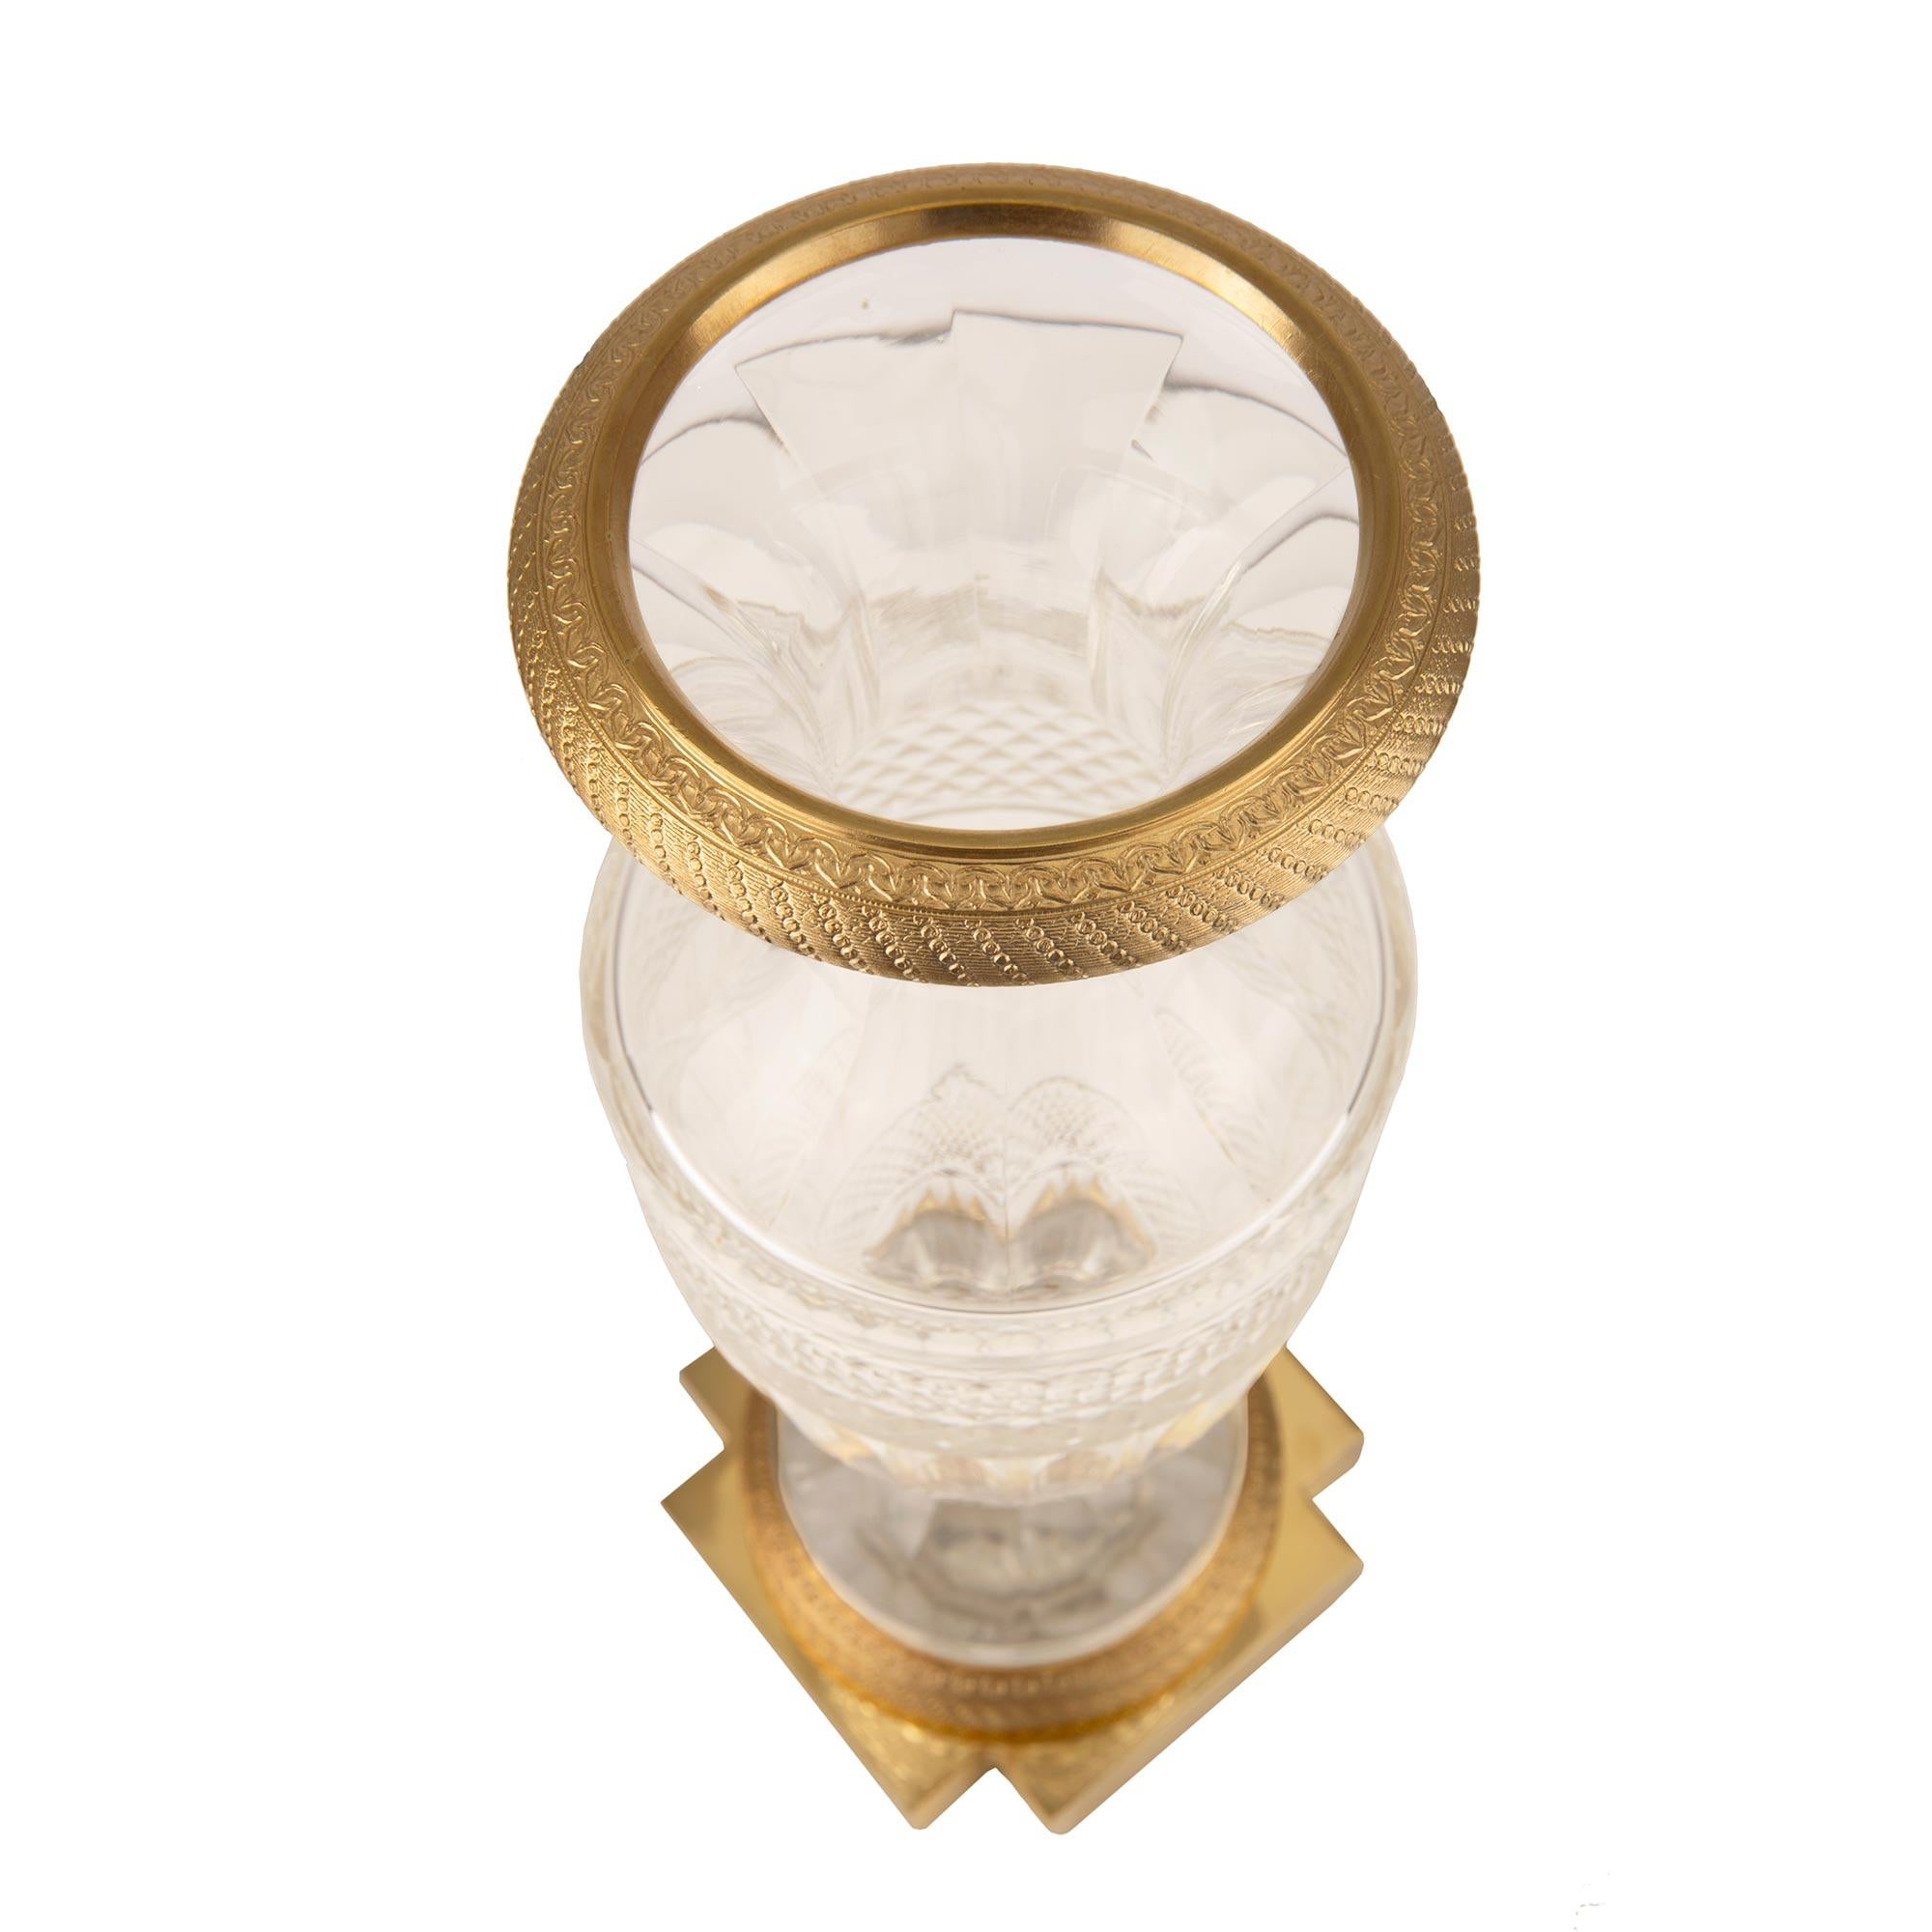 A most elegant French 19th century Louis XVI st. ormolu and Baccarat crystal vase. The vase is raised by a square base with cut corners and a beautiful richly chased wrap around ormolu band. The center of the base, under the crystal socle, is